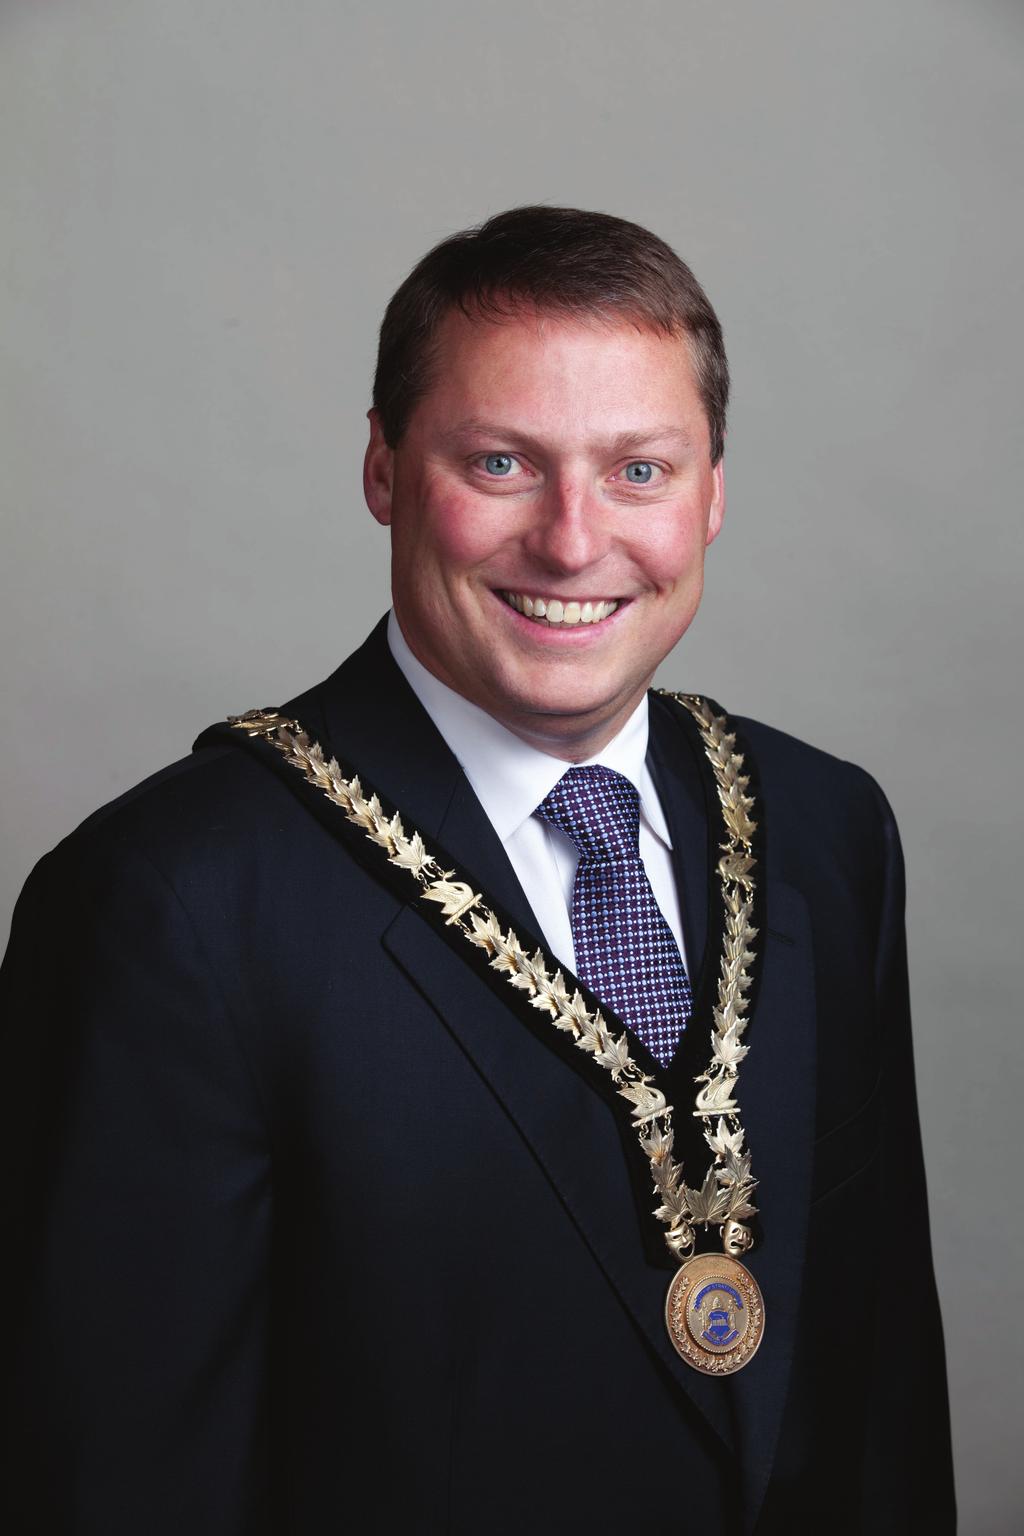 MESSAGE FROM THE BOARD PRESIDENT: Mayor Dan Mathieson, Board President, SEED Co. The 21st century ushered in an age where culture and quality of life take precedence in cities and urban regions.